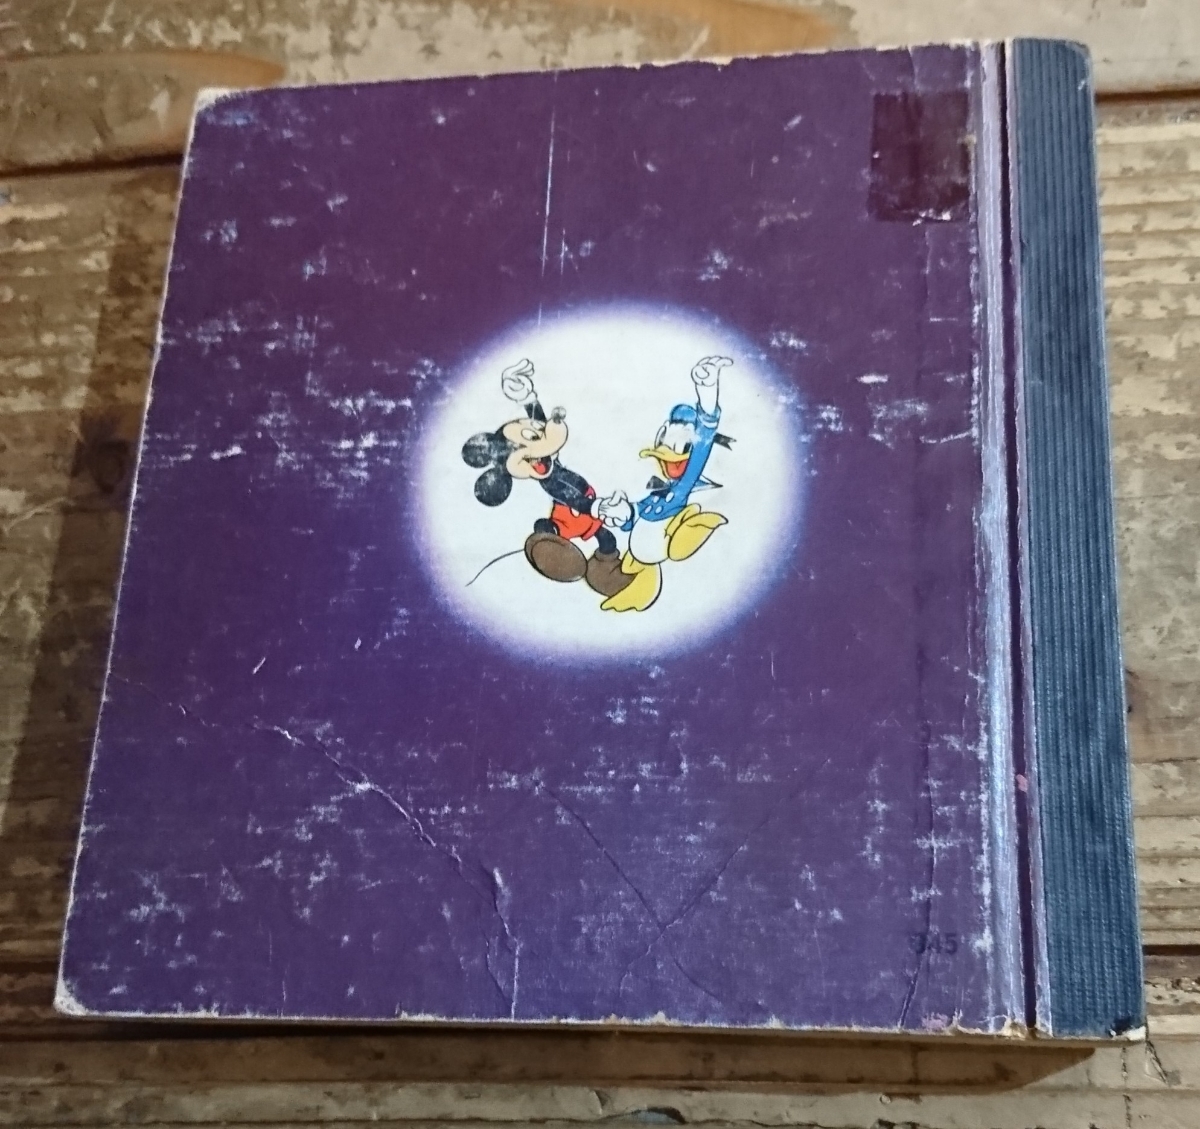 40s vintage mickey mouse the miracle maker アンティーク ヴィンテージ ミッキーマウス 絵本 コレクション_画像2